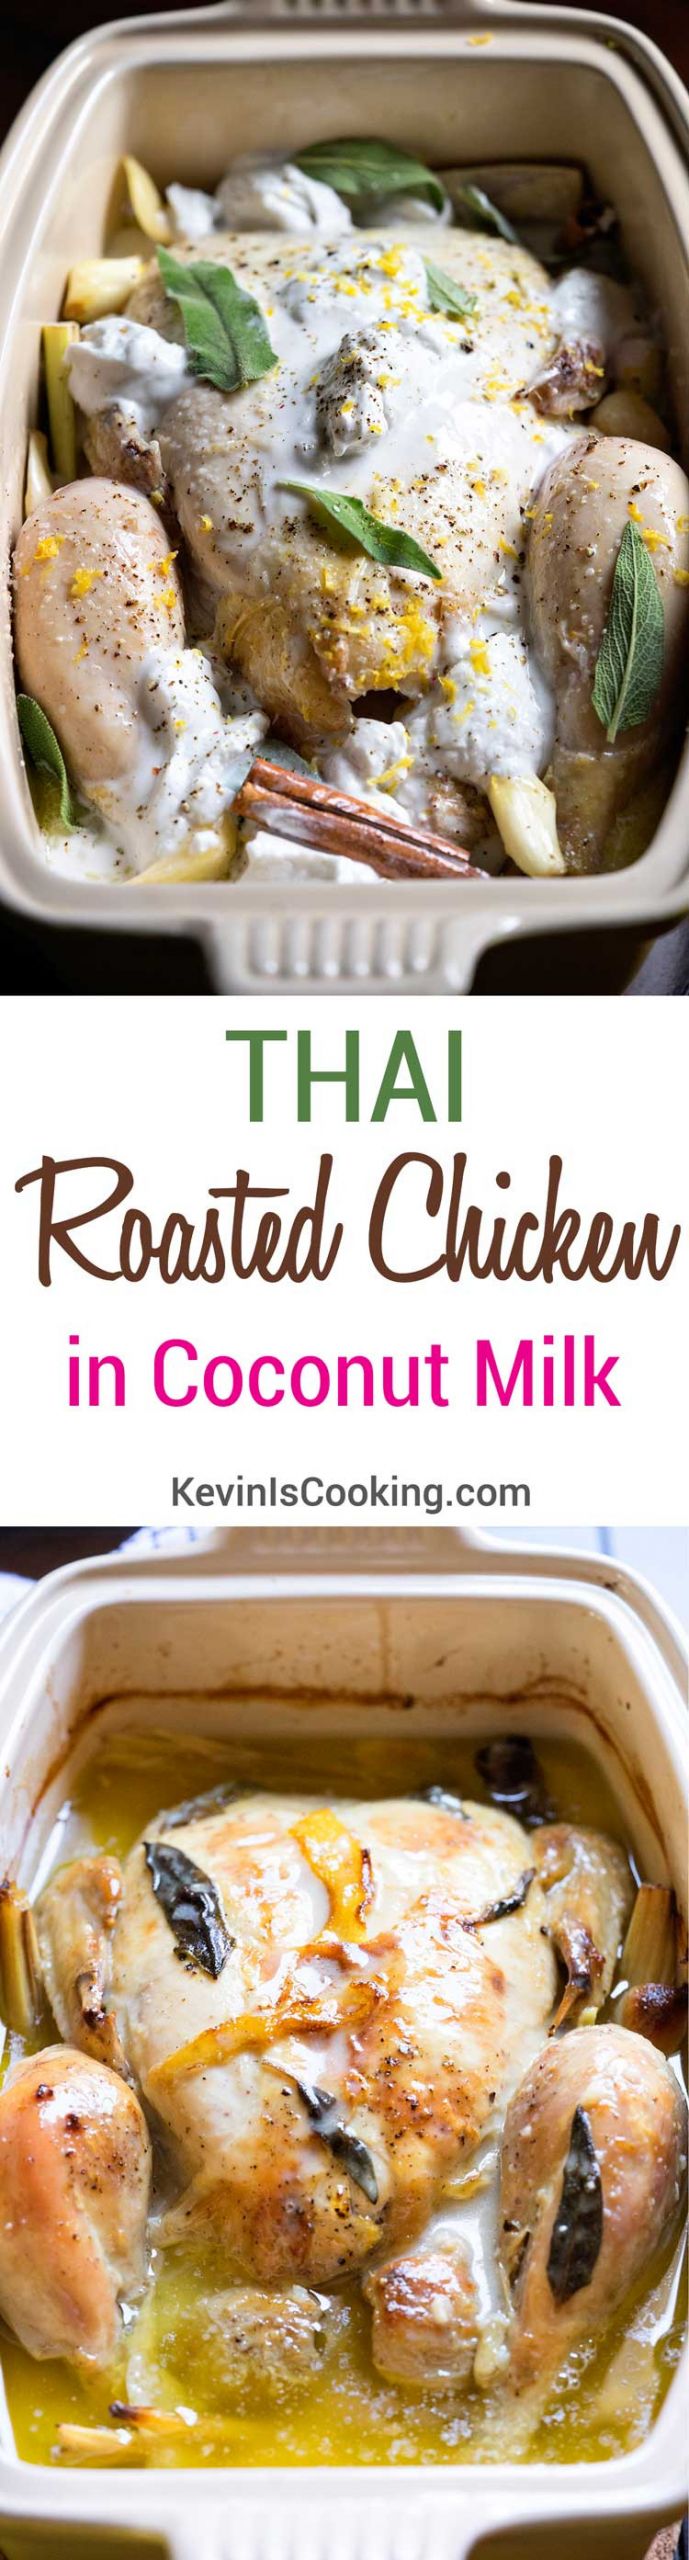 Thai Chicken Recipes With Coconut Milk
 Thai Roasted Chicken in Coconut Milk Kevin Is Cooking